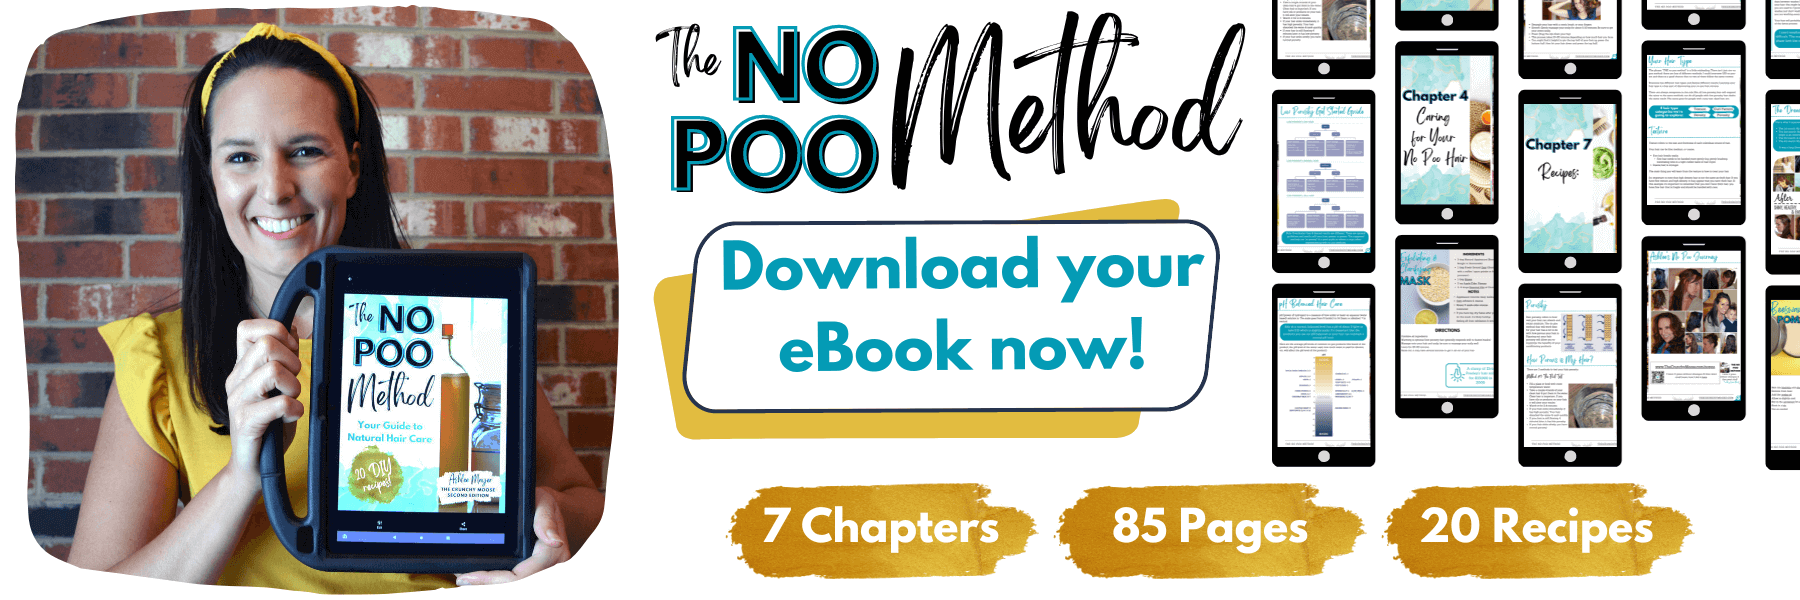 get started with the no poo method guide / ebook